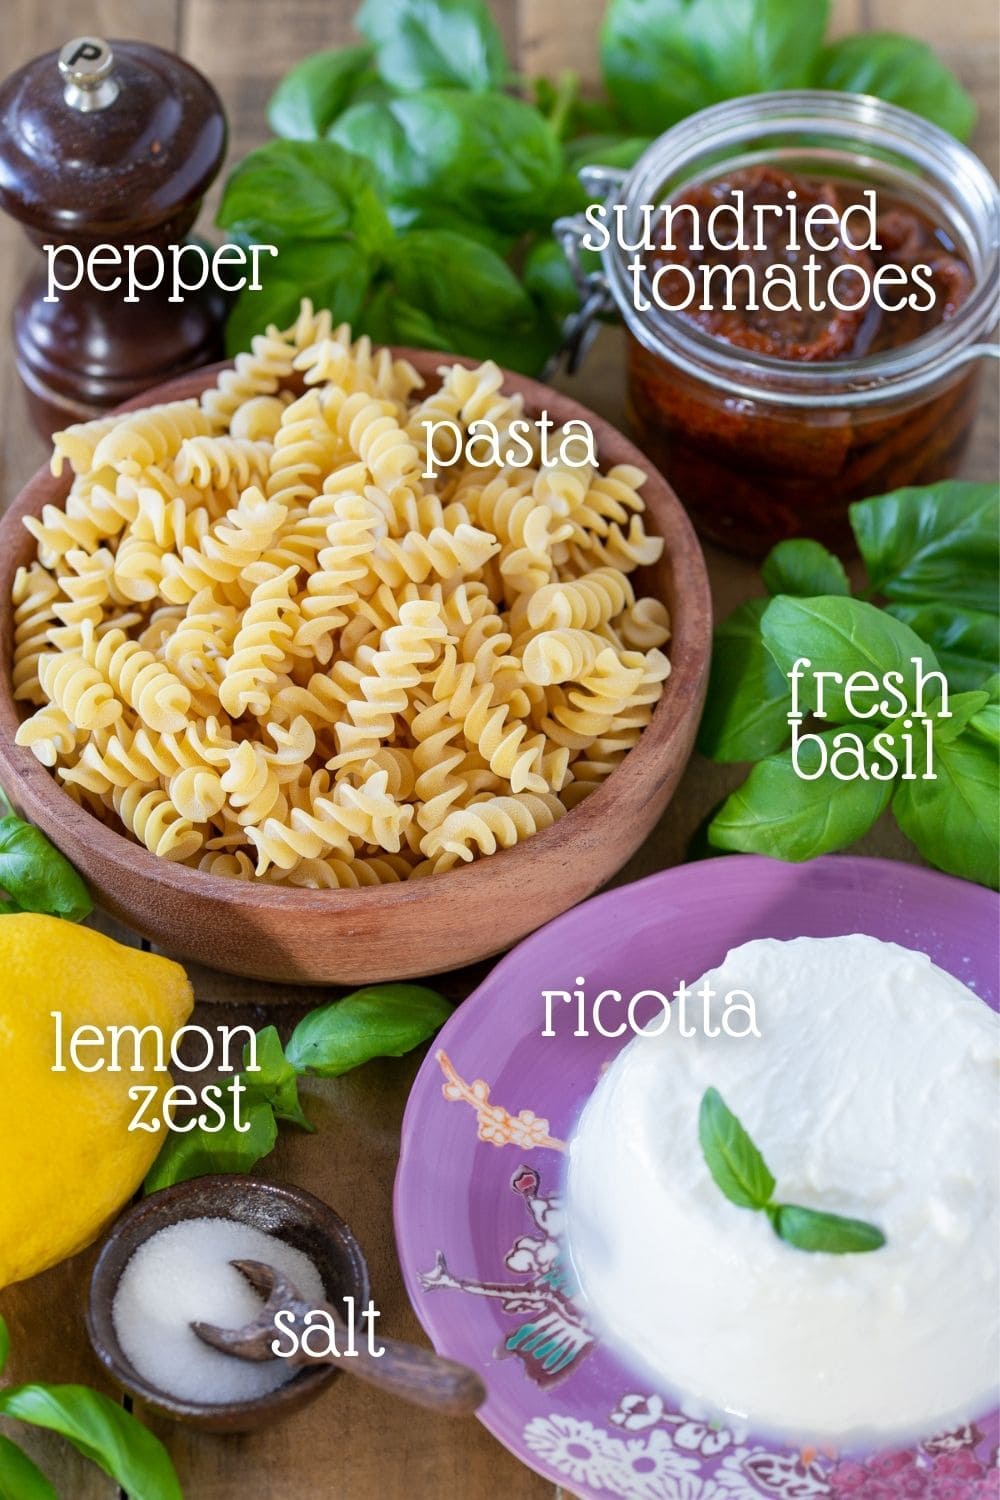 The ingredients needed in this recipe placed in separate bowls.